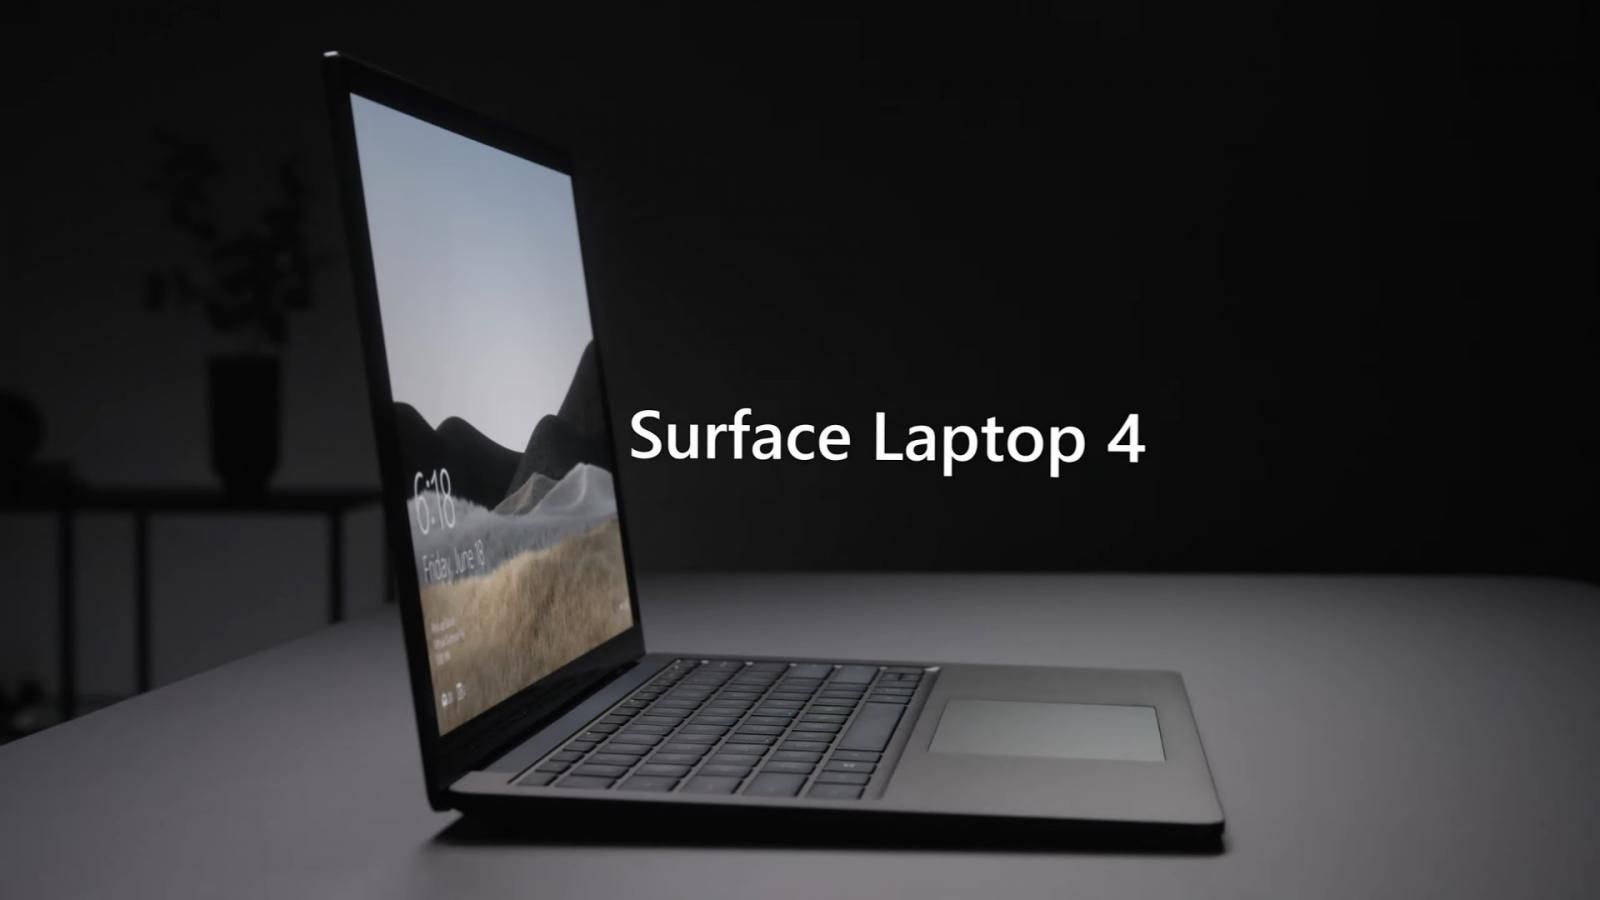 Microsoft’s Surface Laptop 4 is currently 29 percent off